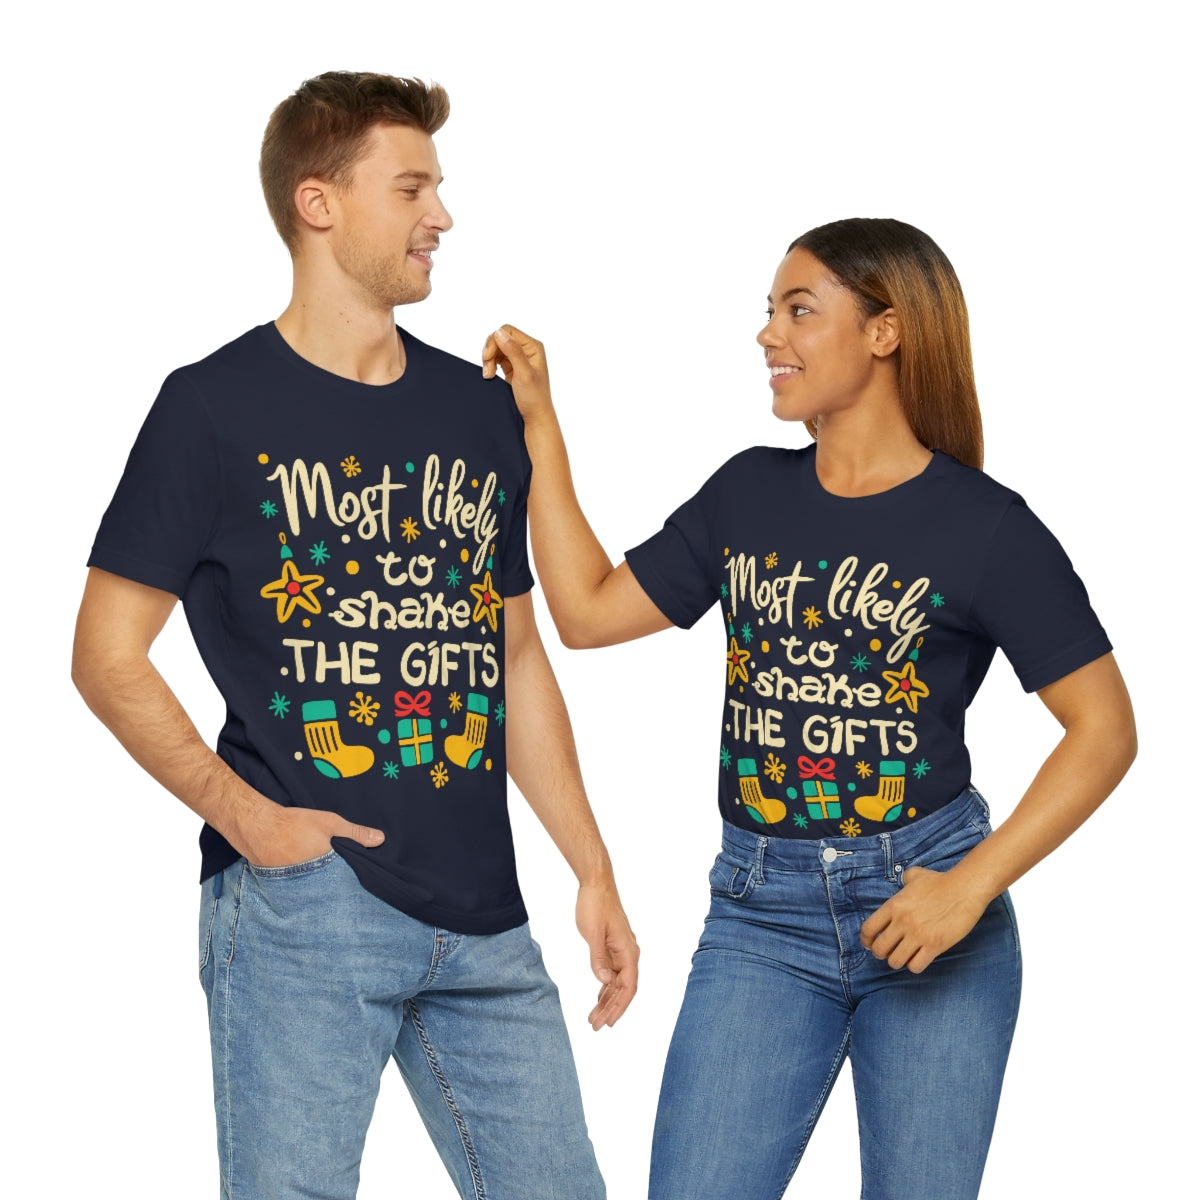 Most Likely to shake the gifts T-shirt for women or men, Most Likely To Christmas Shirts, Custom Most Likely T-Shirts - 37 Design Unit